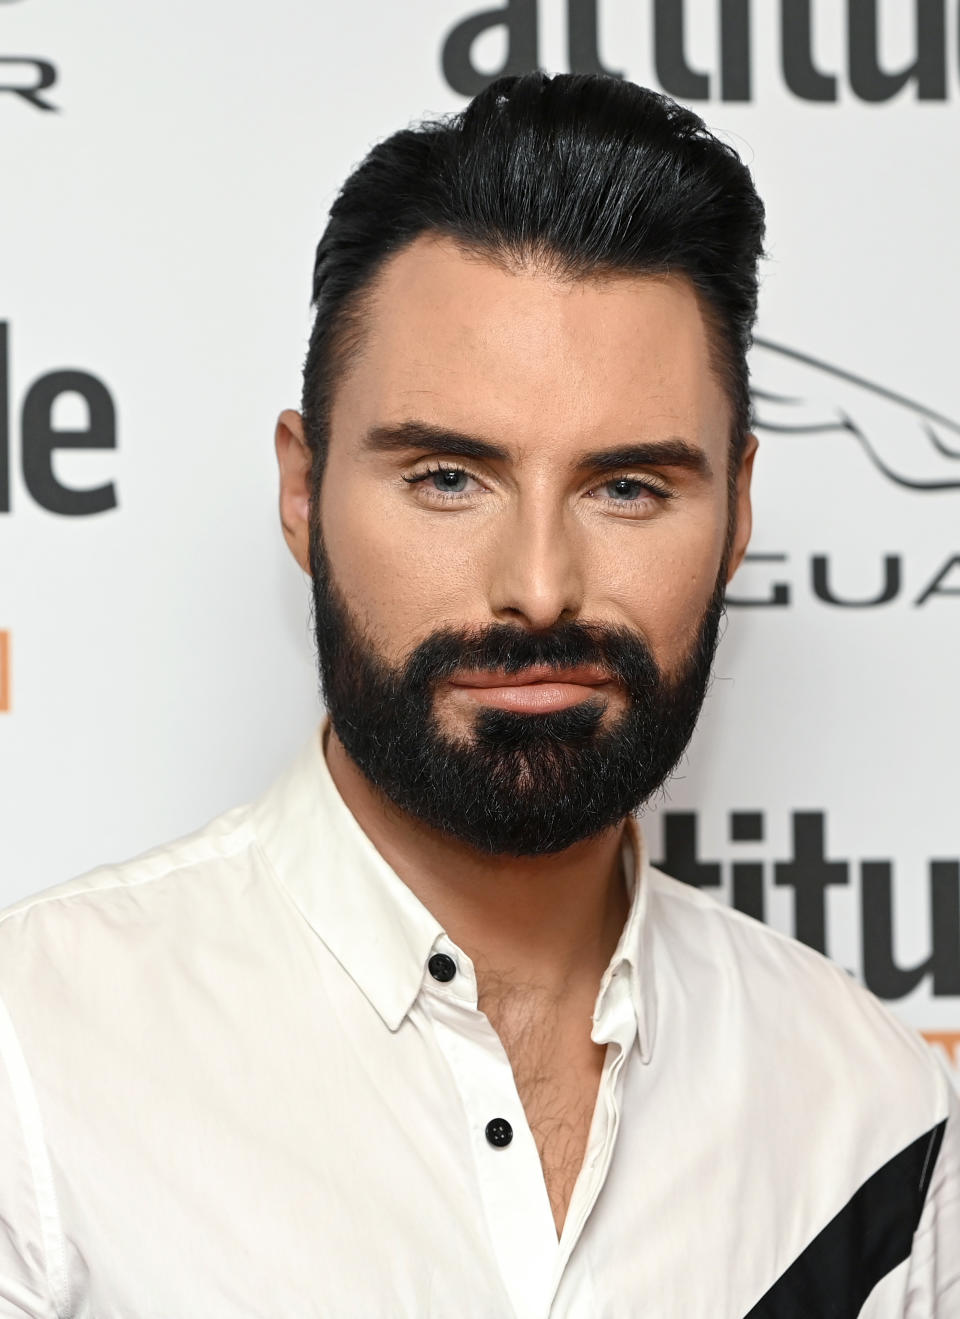 LONDON, ENGLAND - OCTOBER 06: Rylan Clark-Neal attends The Virgin Atlantic Attitude Awards 2021 at The Roundhouse on October 06, 2021 in London, England. (Photo by Kate Green/Getty Images)